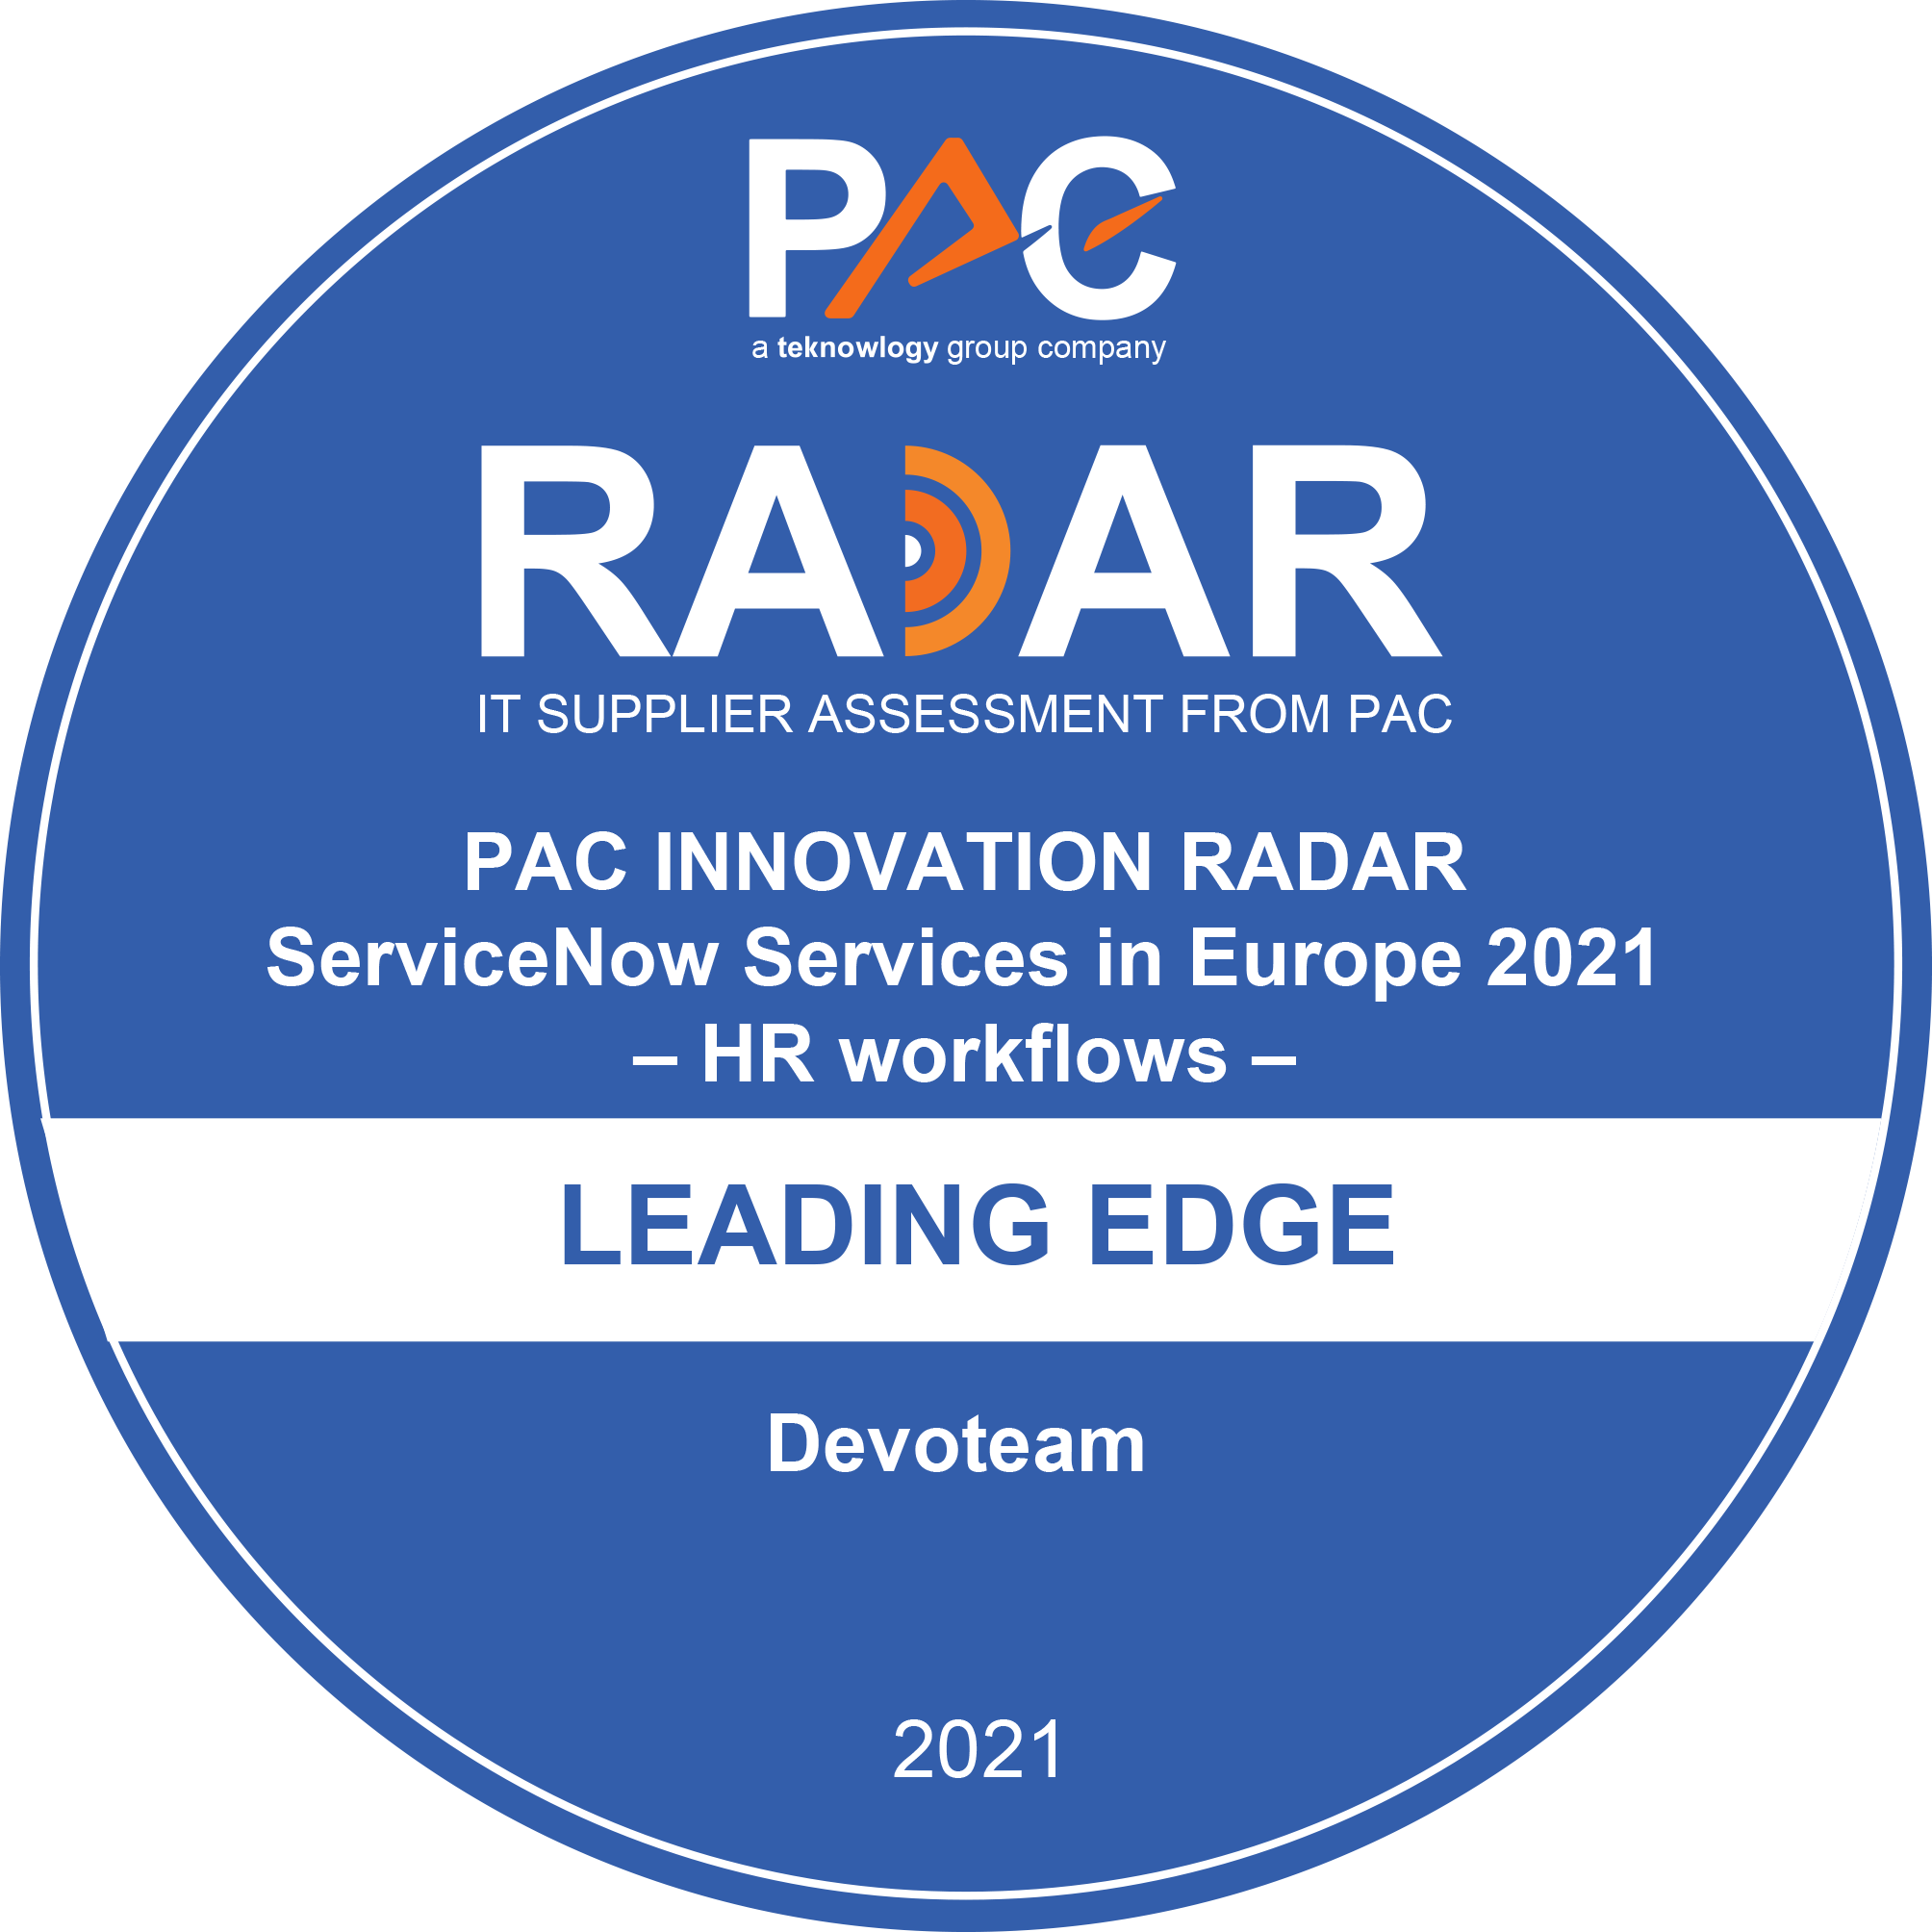 Devoteam recognized as ‘Leading Edge’ within ServiceNow 2021